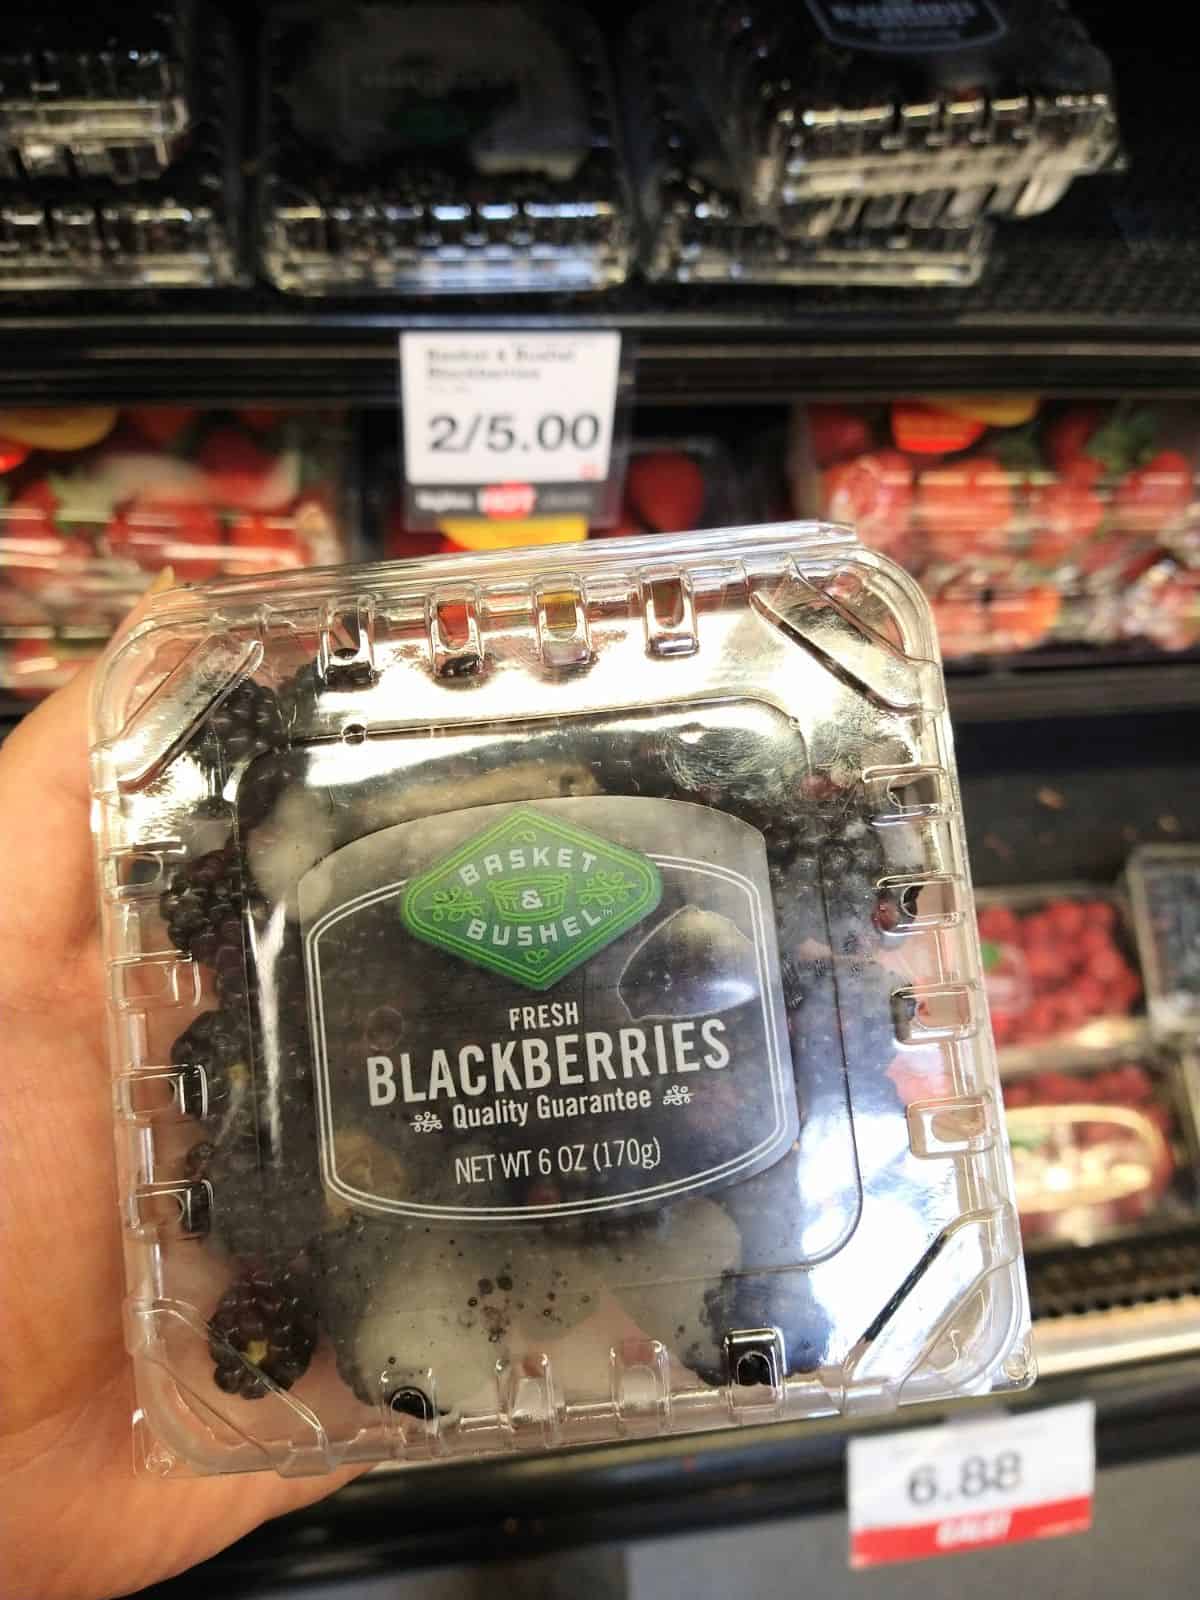 Holding up a 6 ounce package of Basket & Bushel Fresh blackberries at the grocery store.